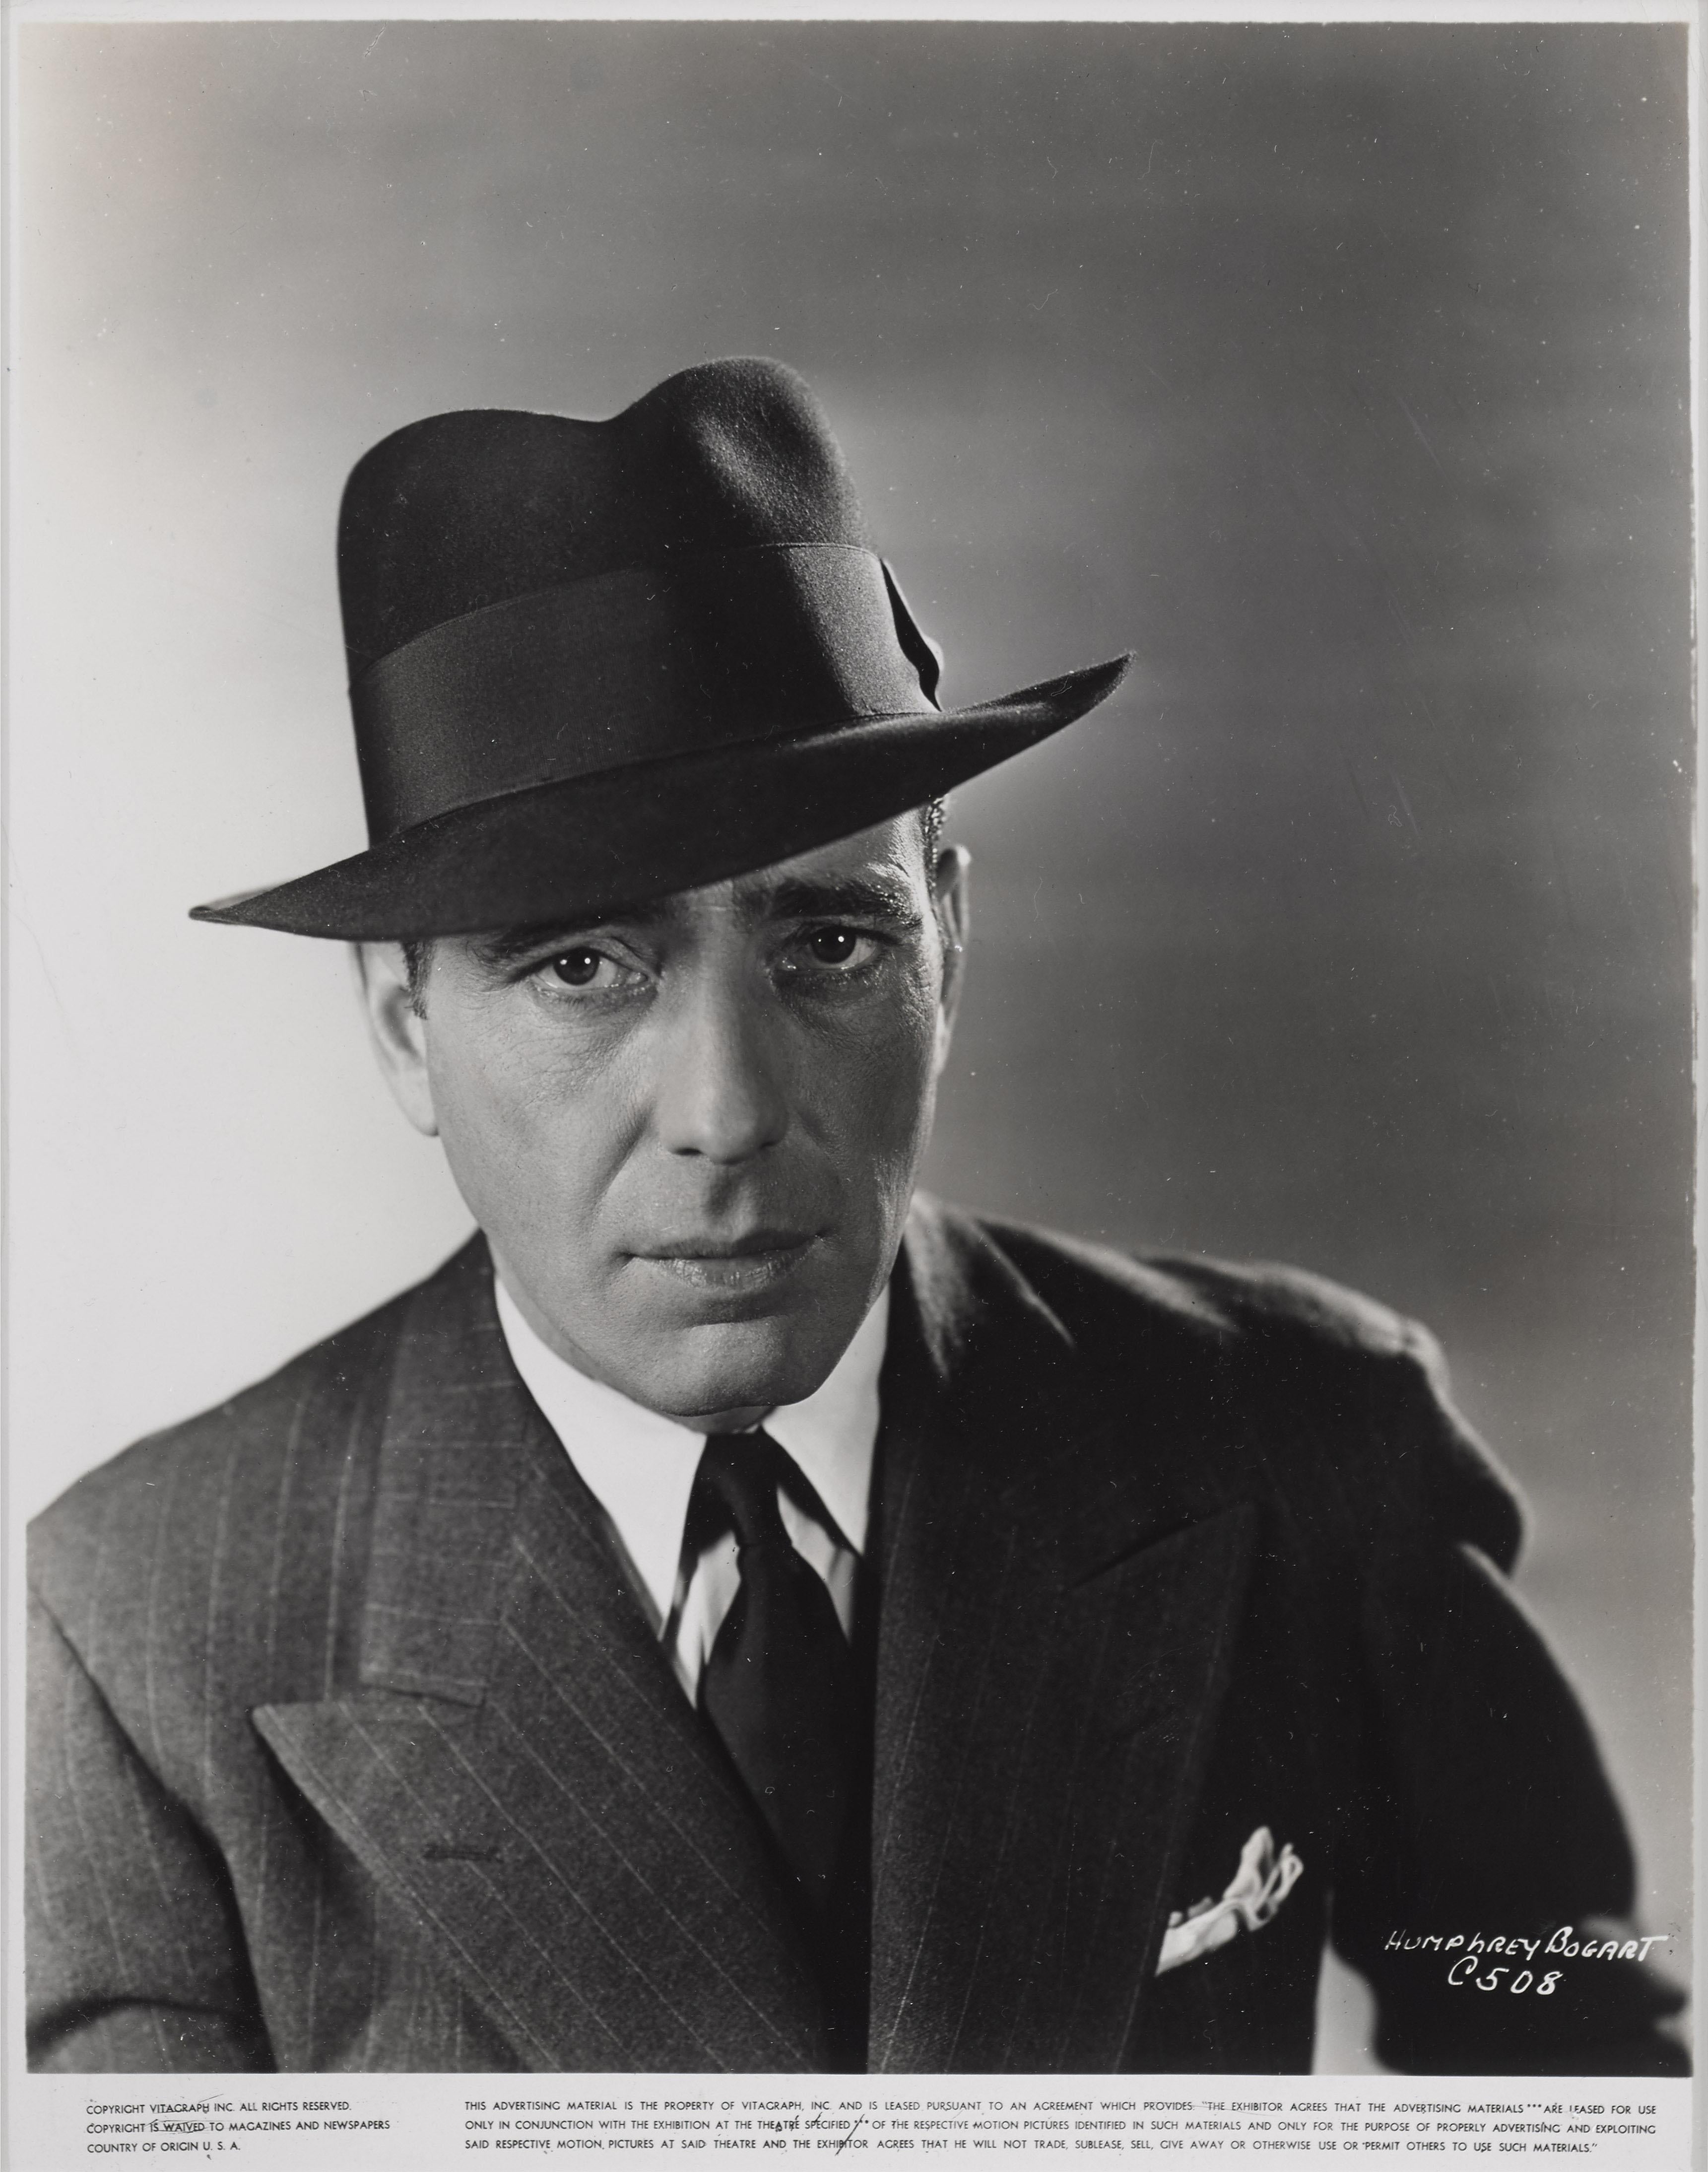 Original photographic production still used by the studio to advertise the film. these stills were sent out to news papers. This piece shows a great image of Humphrey Bogart as architect Richard Mason. This film was directed by Curtis